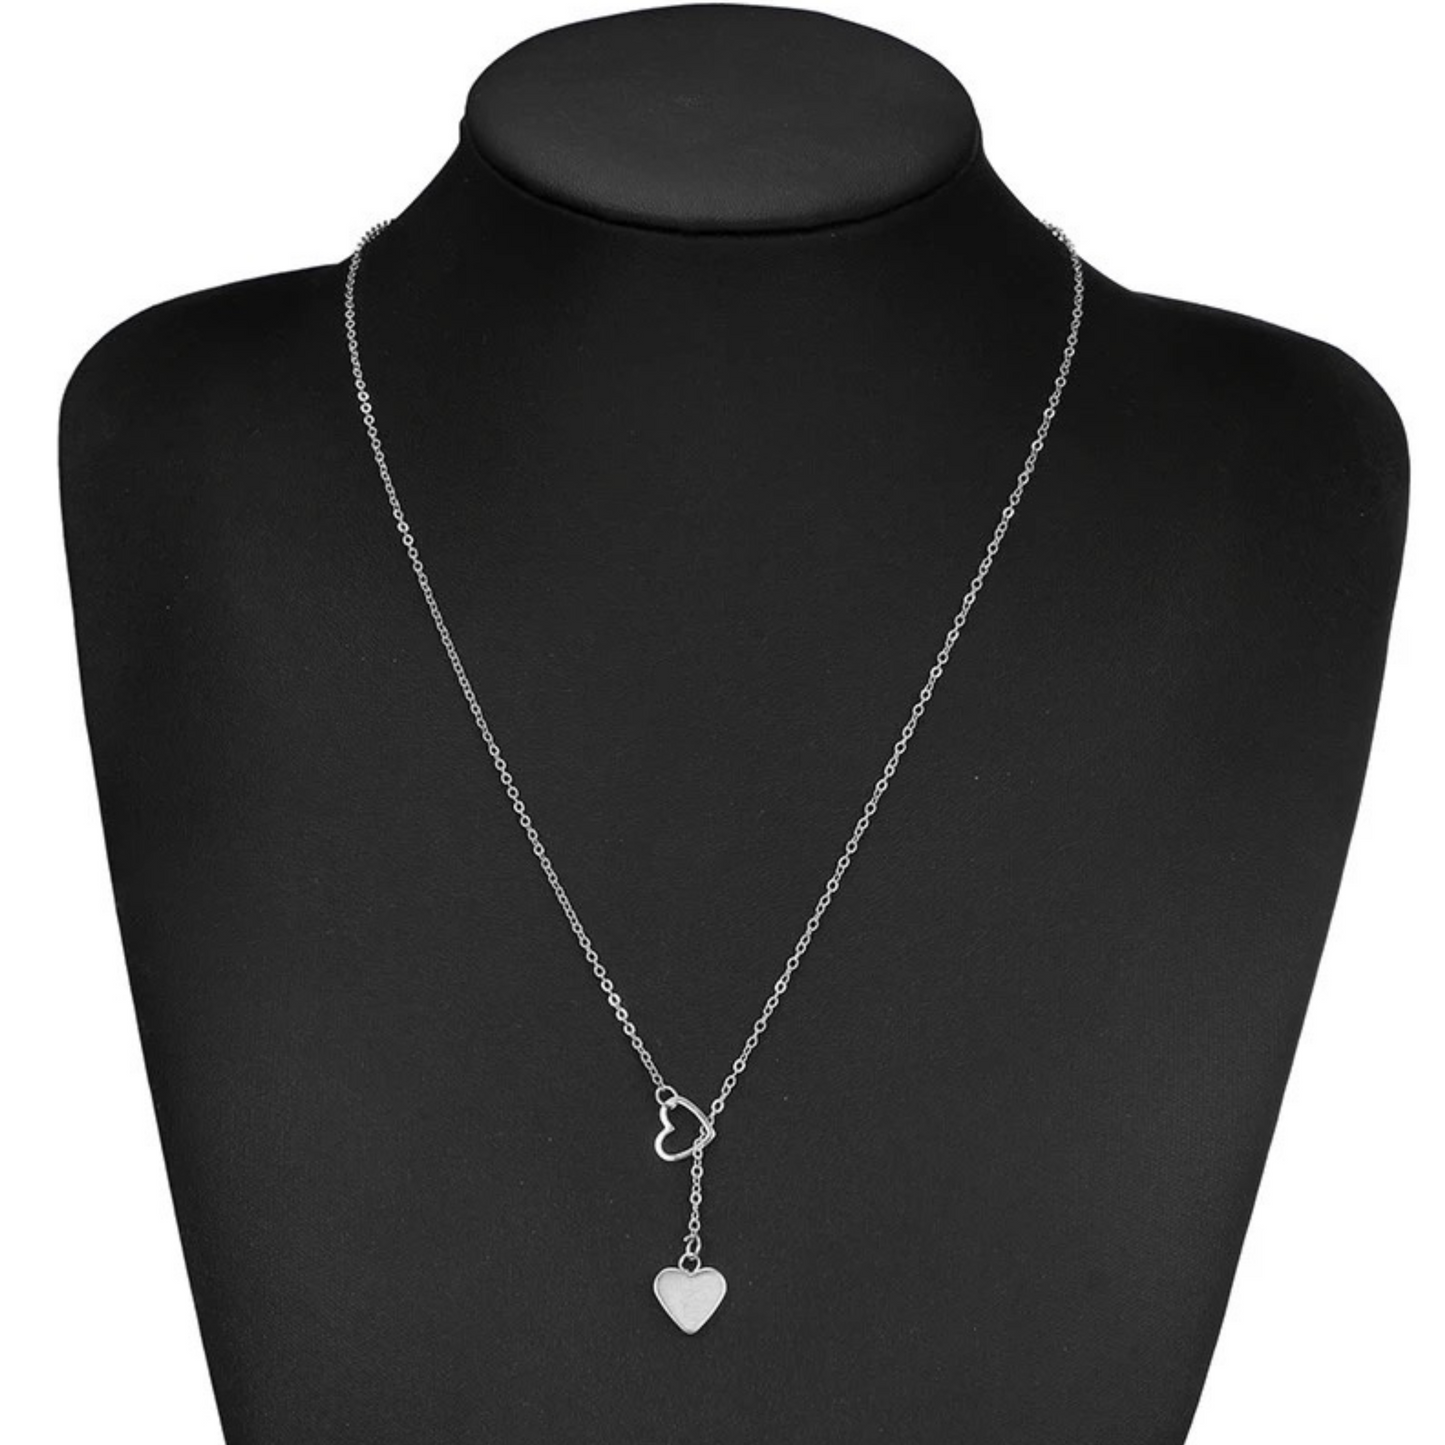 Chasing Hearts Necklace